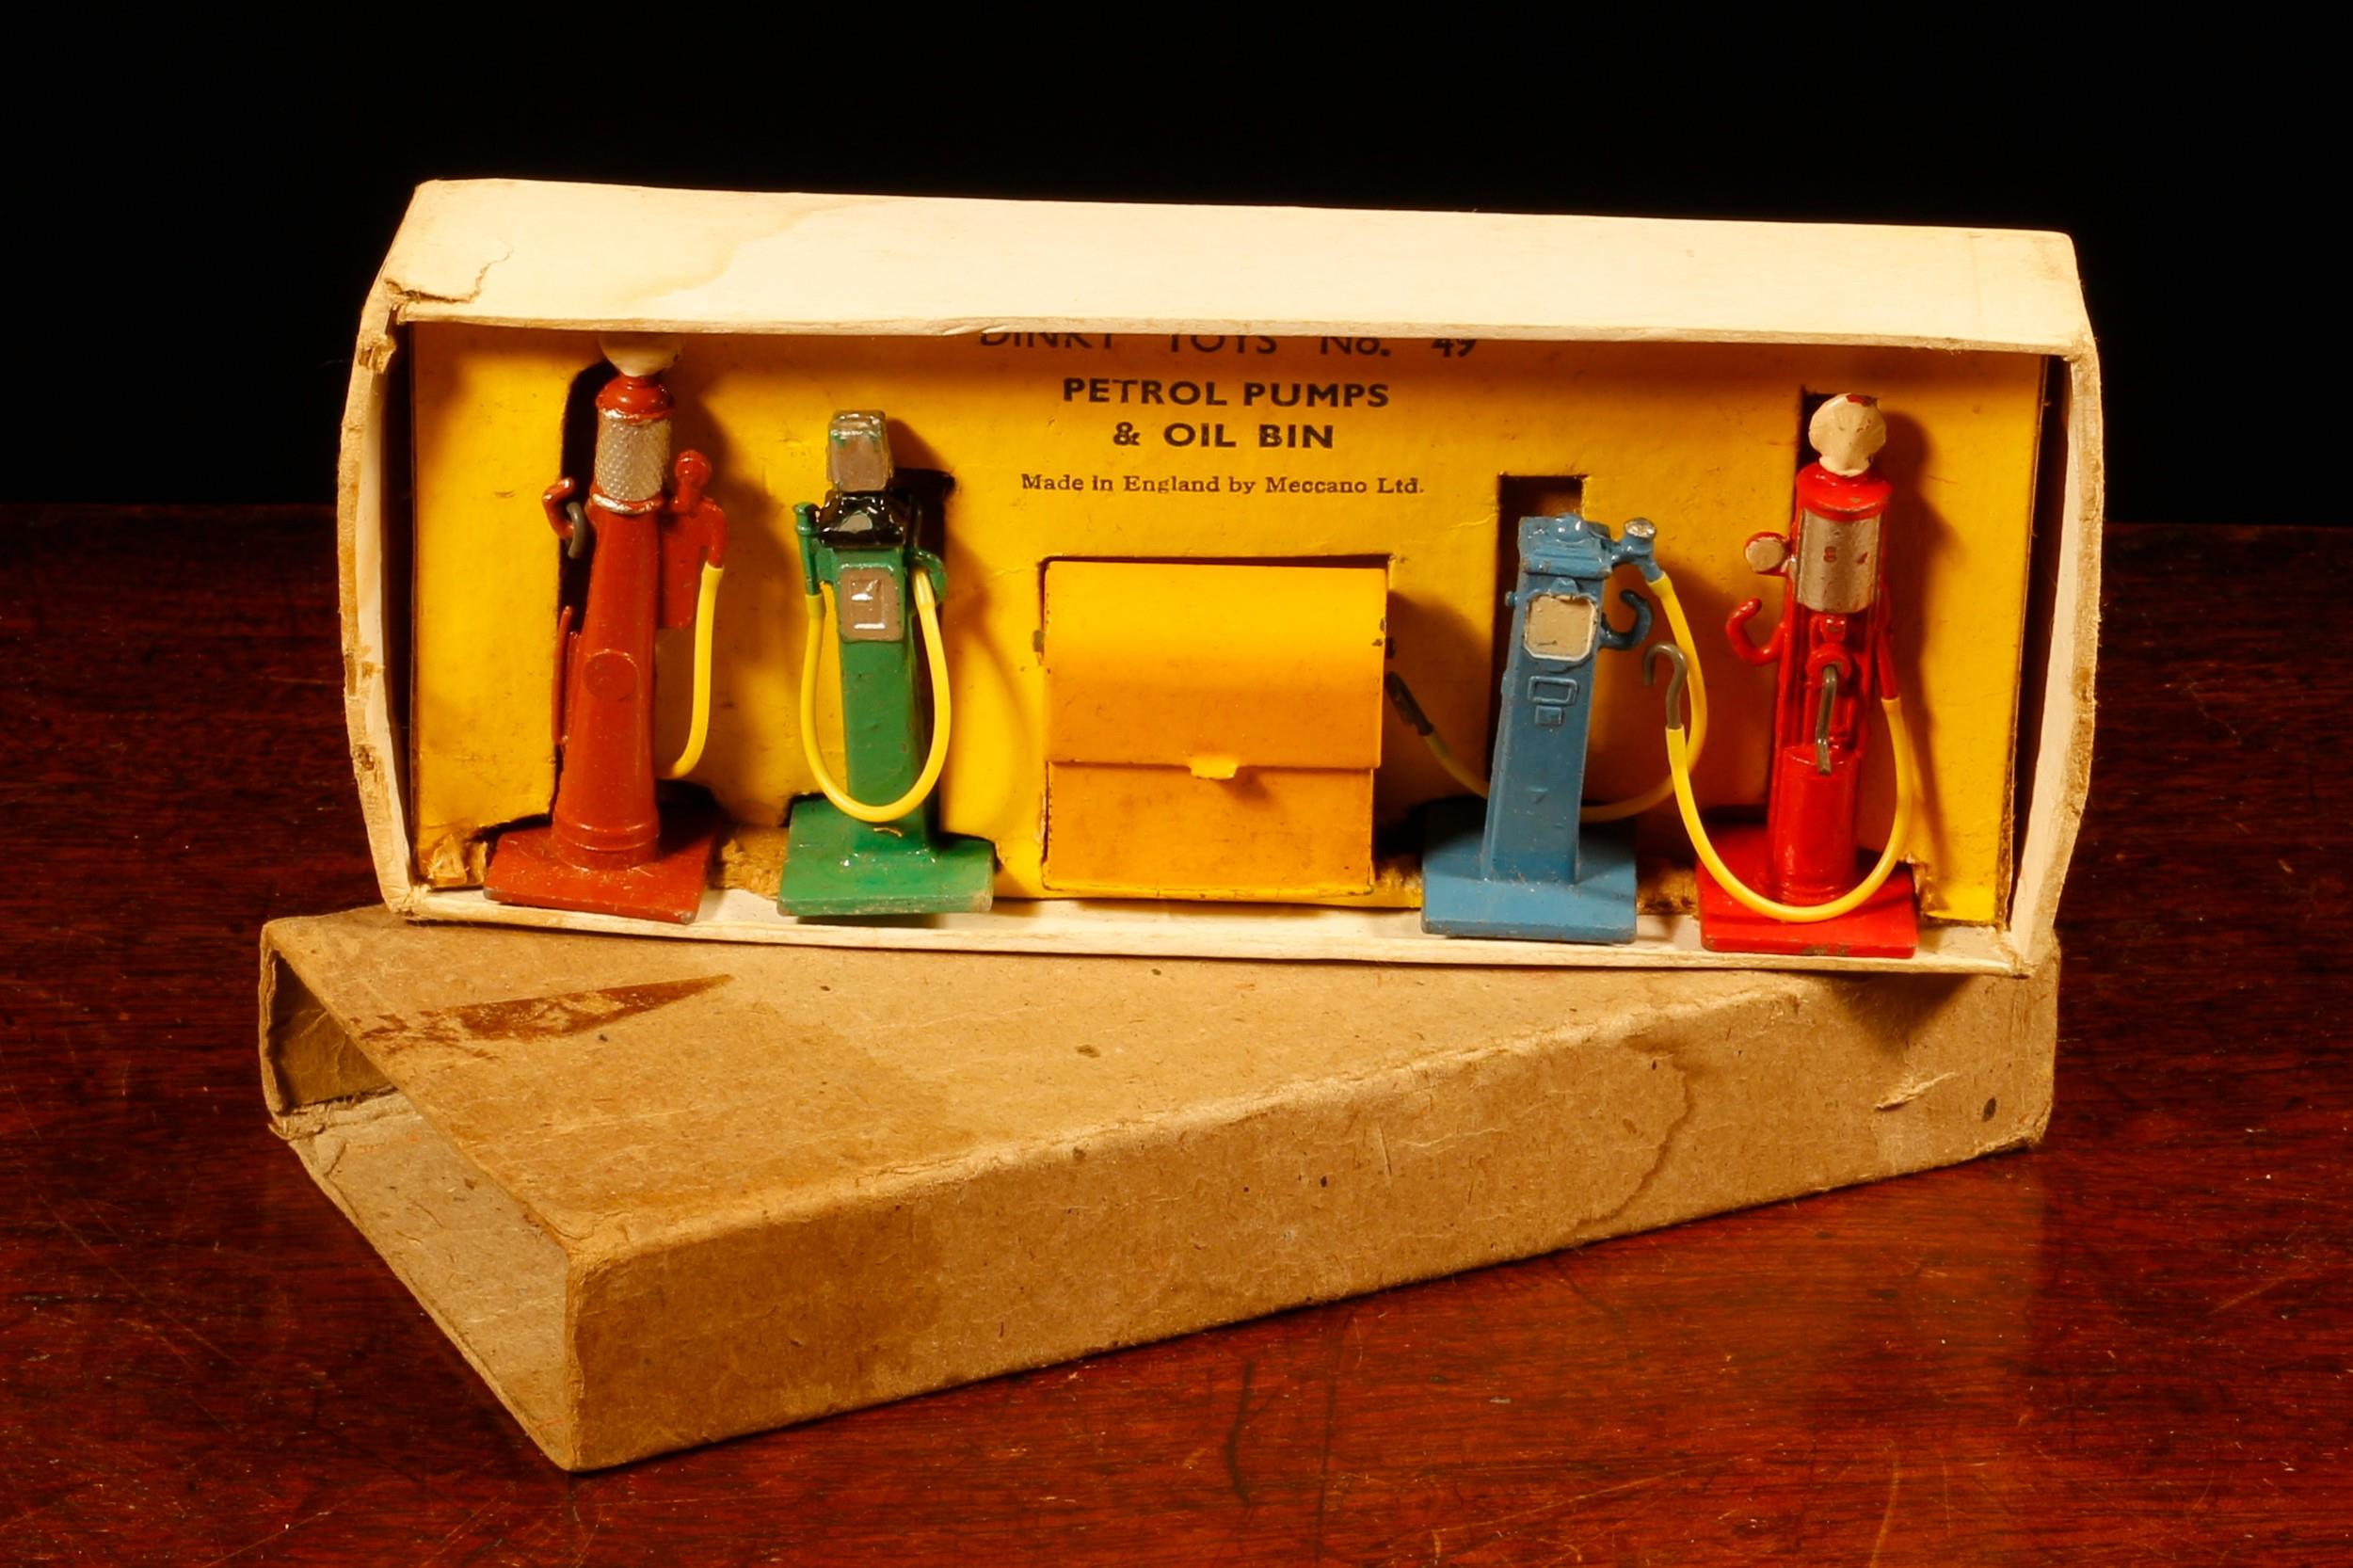 Dinky Toys 49 petrol pump and oil bin set, boxed with original inner cardboard display piece